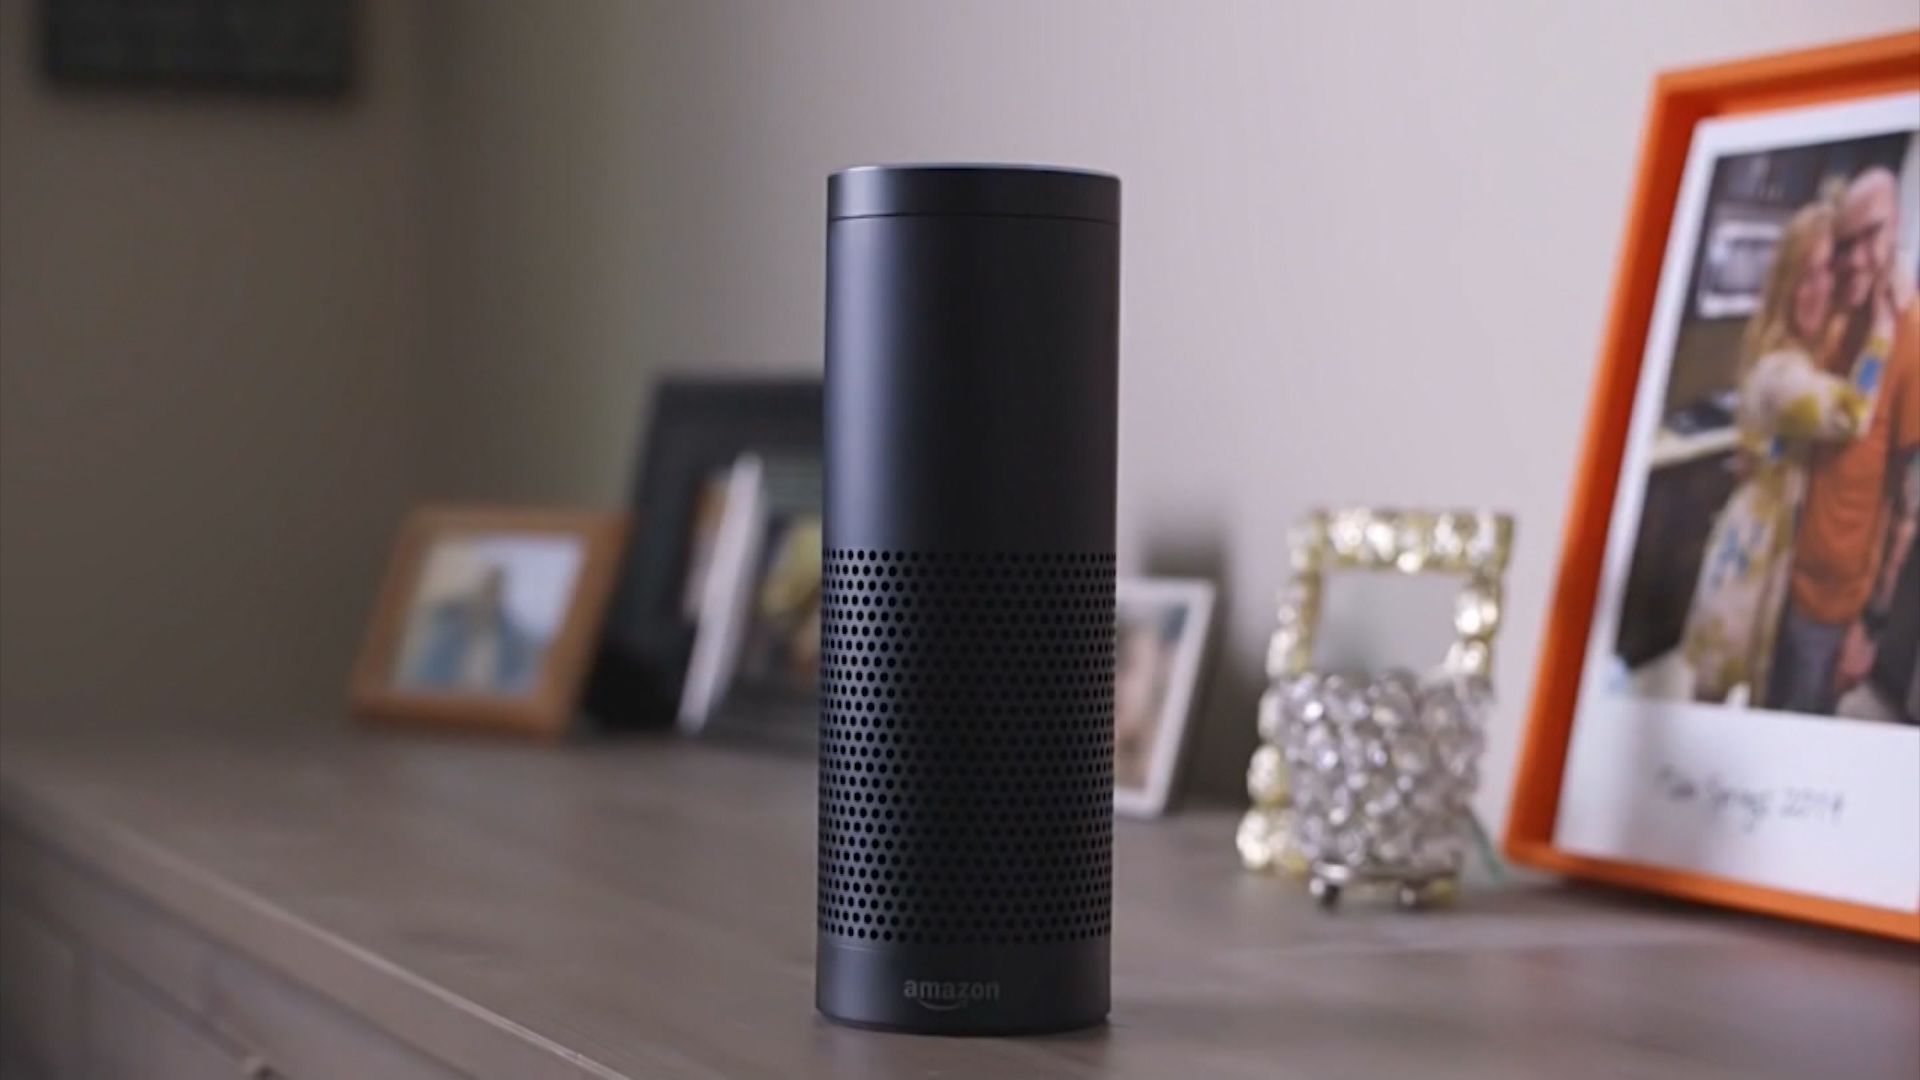 Alexa, go ahead and hand over recordings in case | CNN Business